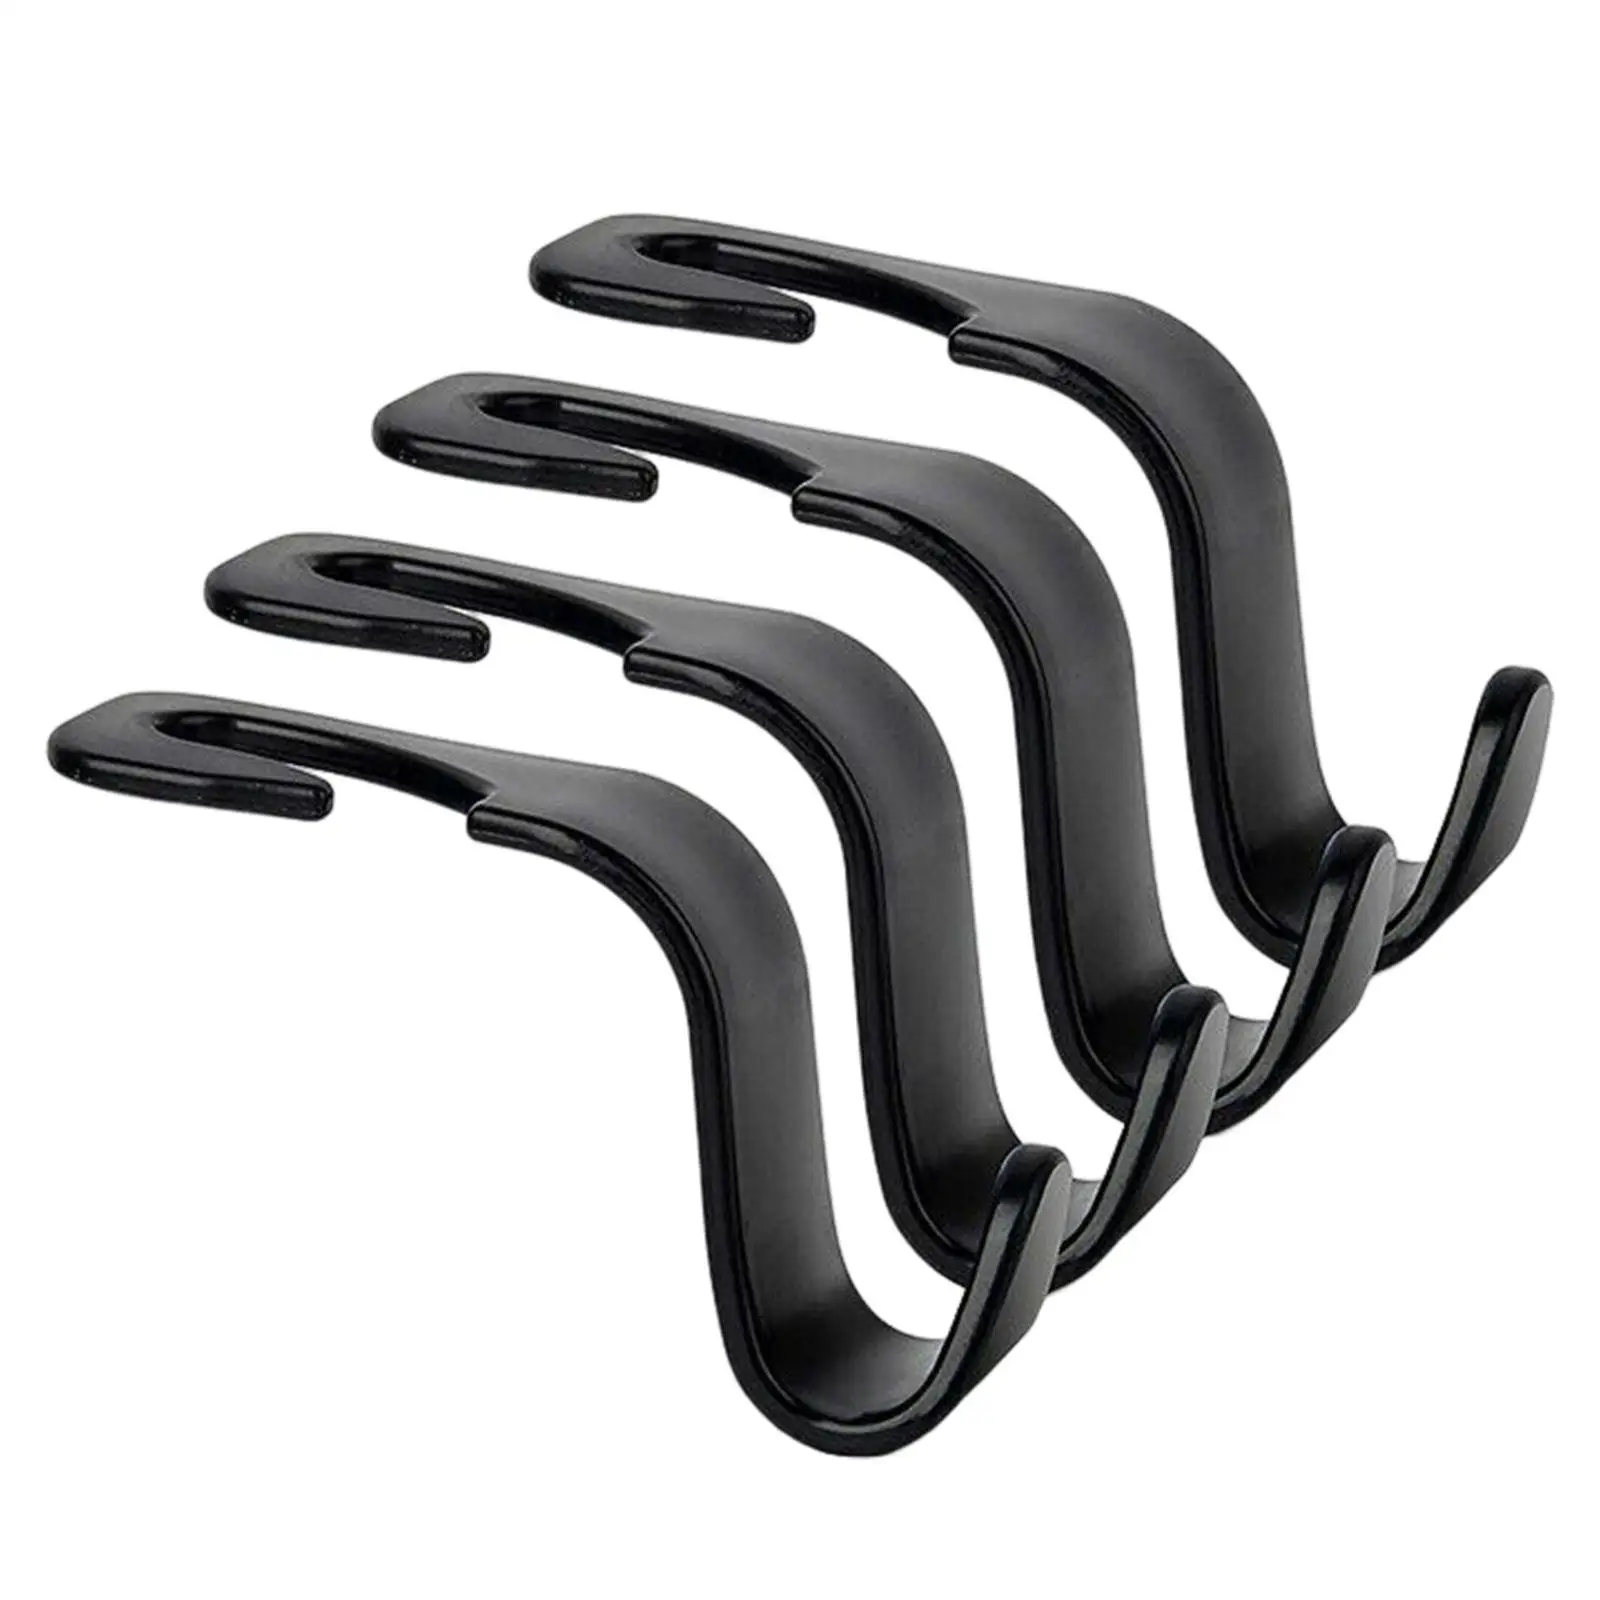 4 Pieces Car Truck Seat hook for headrest Keeping Interior Clean and Organized Sturdy Smooth